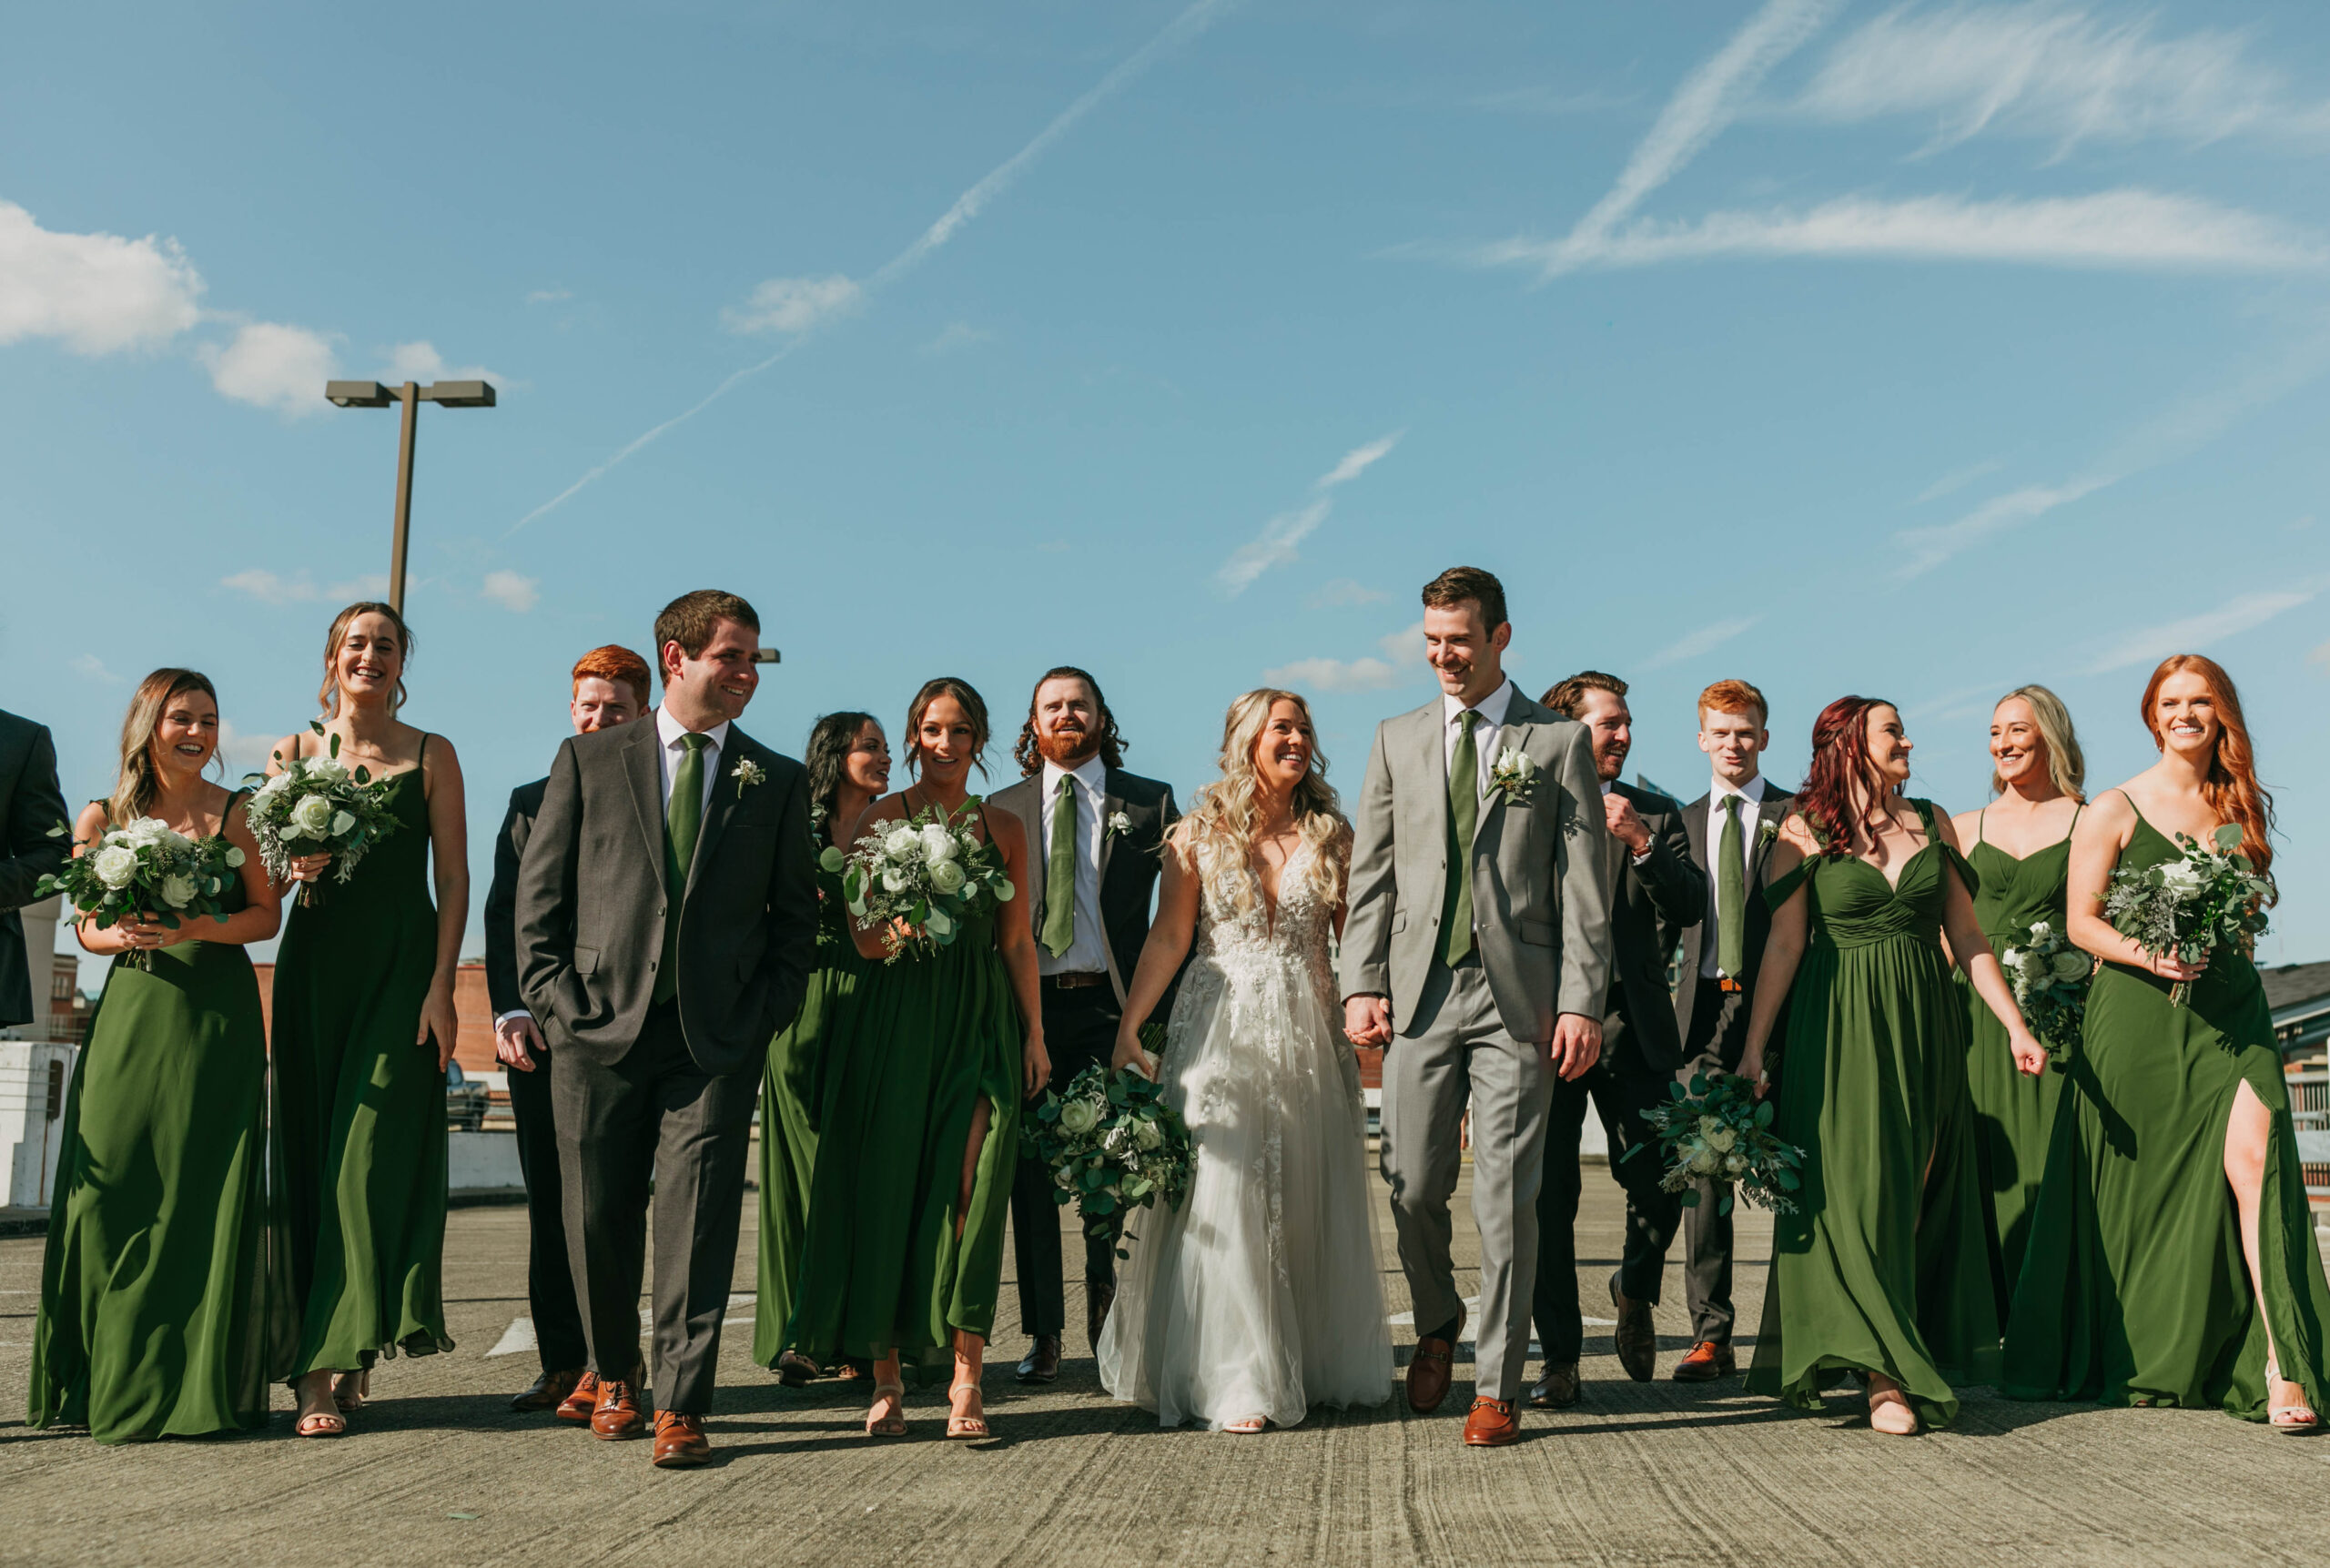 A full wedding party photograph with the city. 